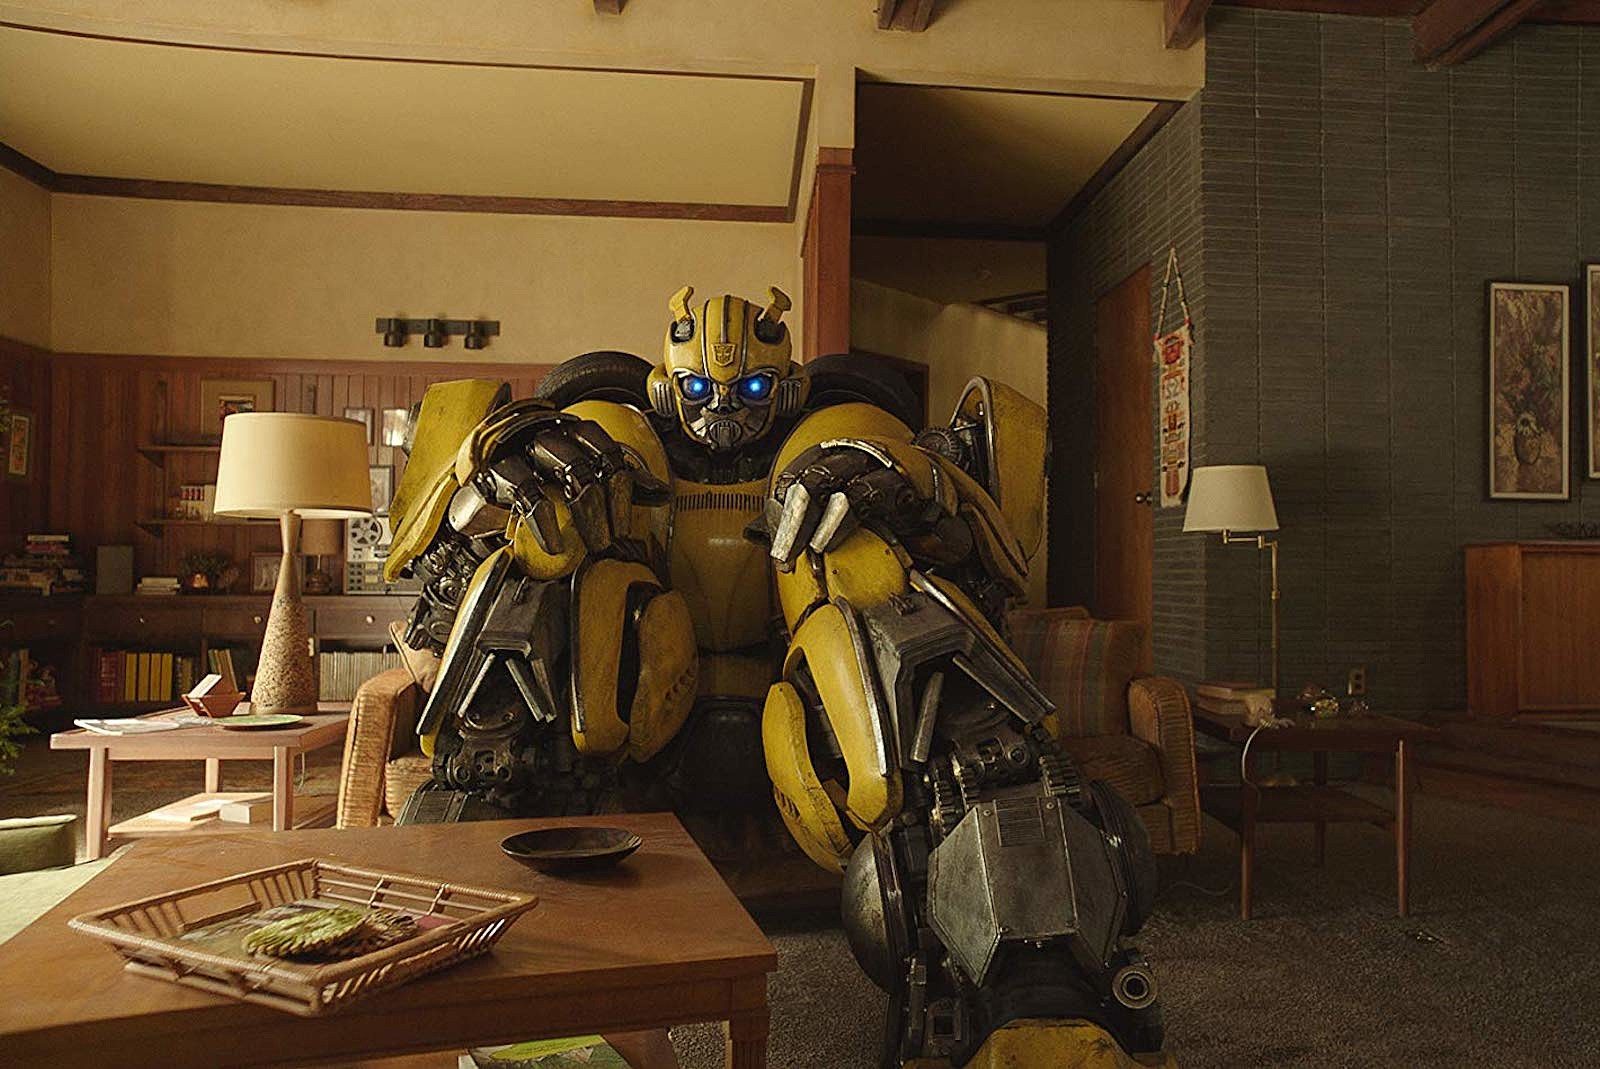 the new transformers bumblebee movie